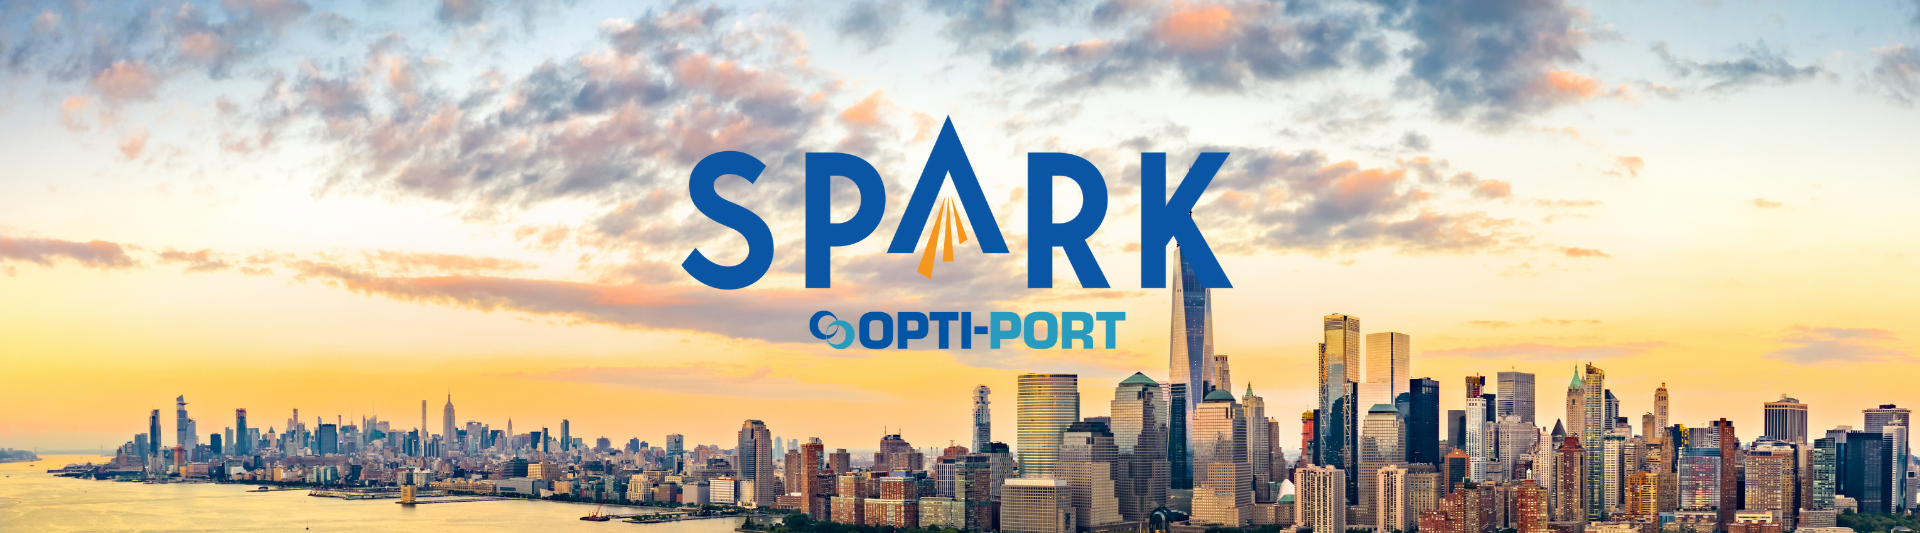 Opti-Port's SPARK Conference at VEE